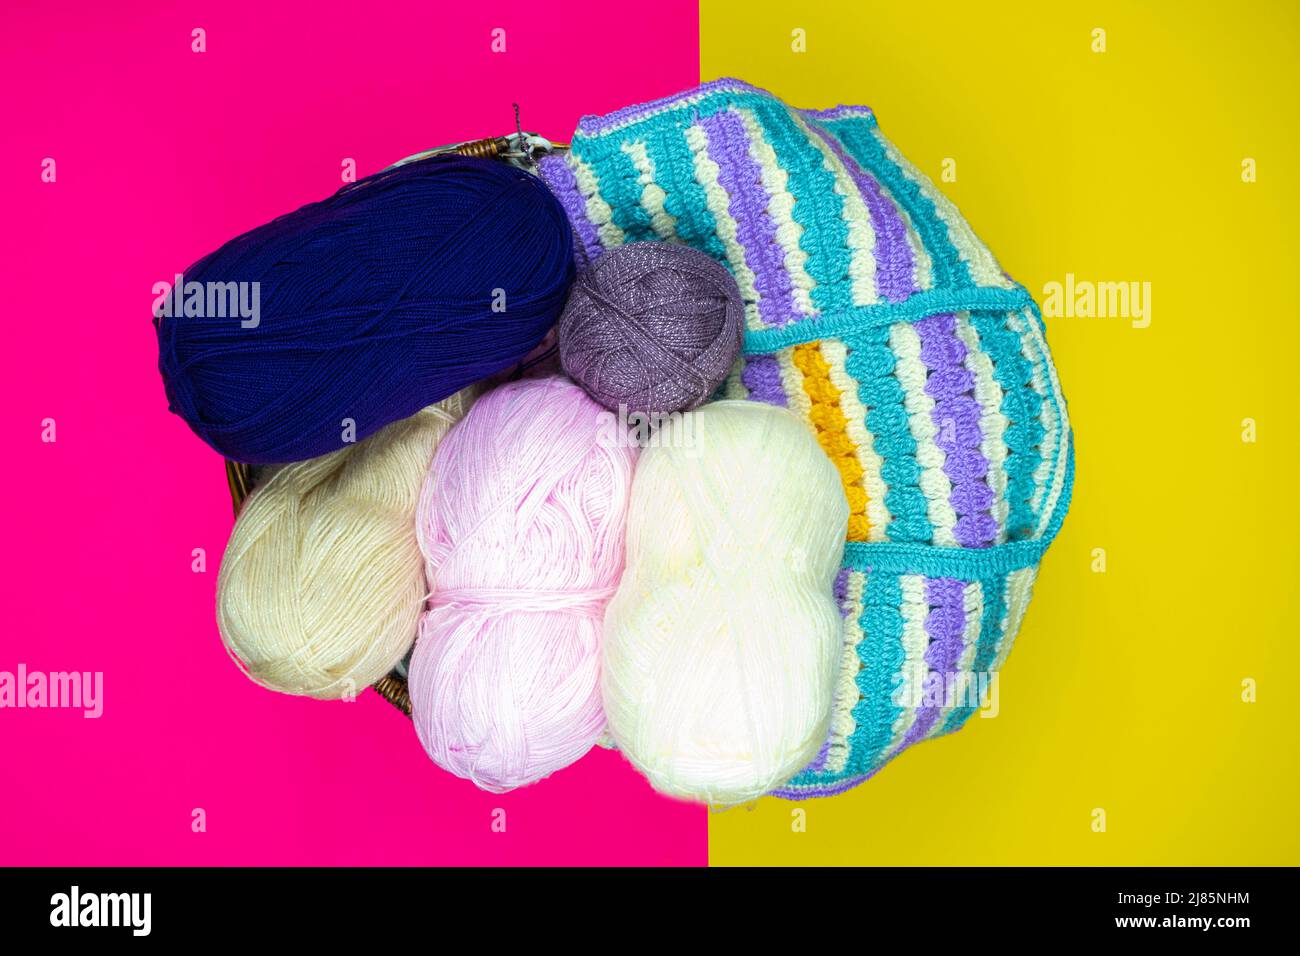 Colorful knitting threads and colored sweater in a wooden basket, pink and yellow background, hand knitting supplies, top view Stock Photo